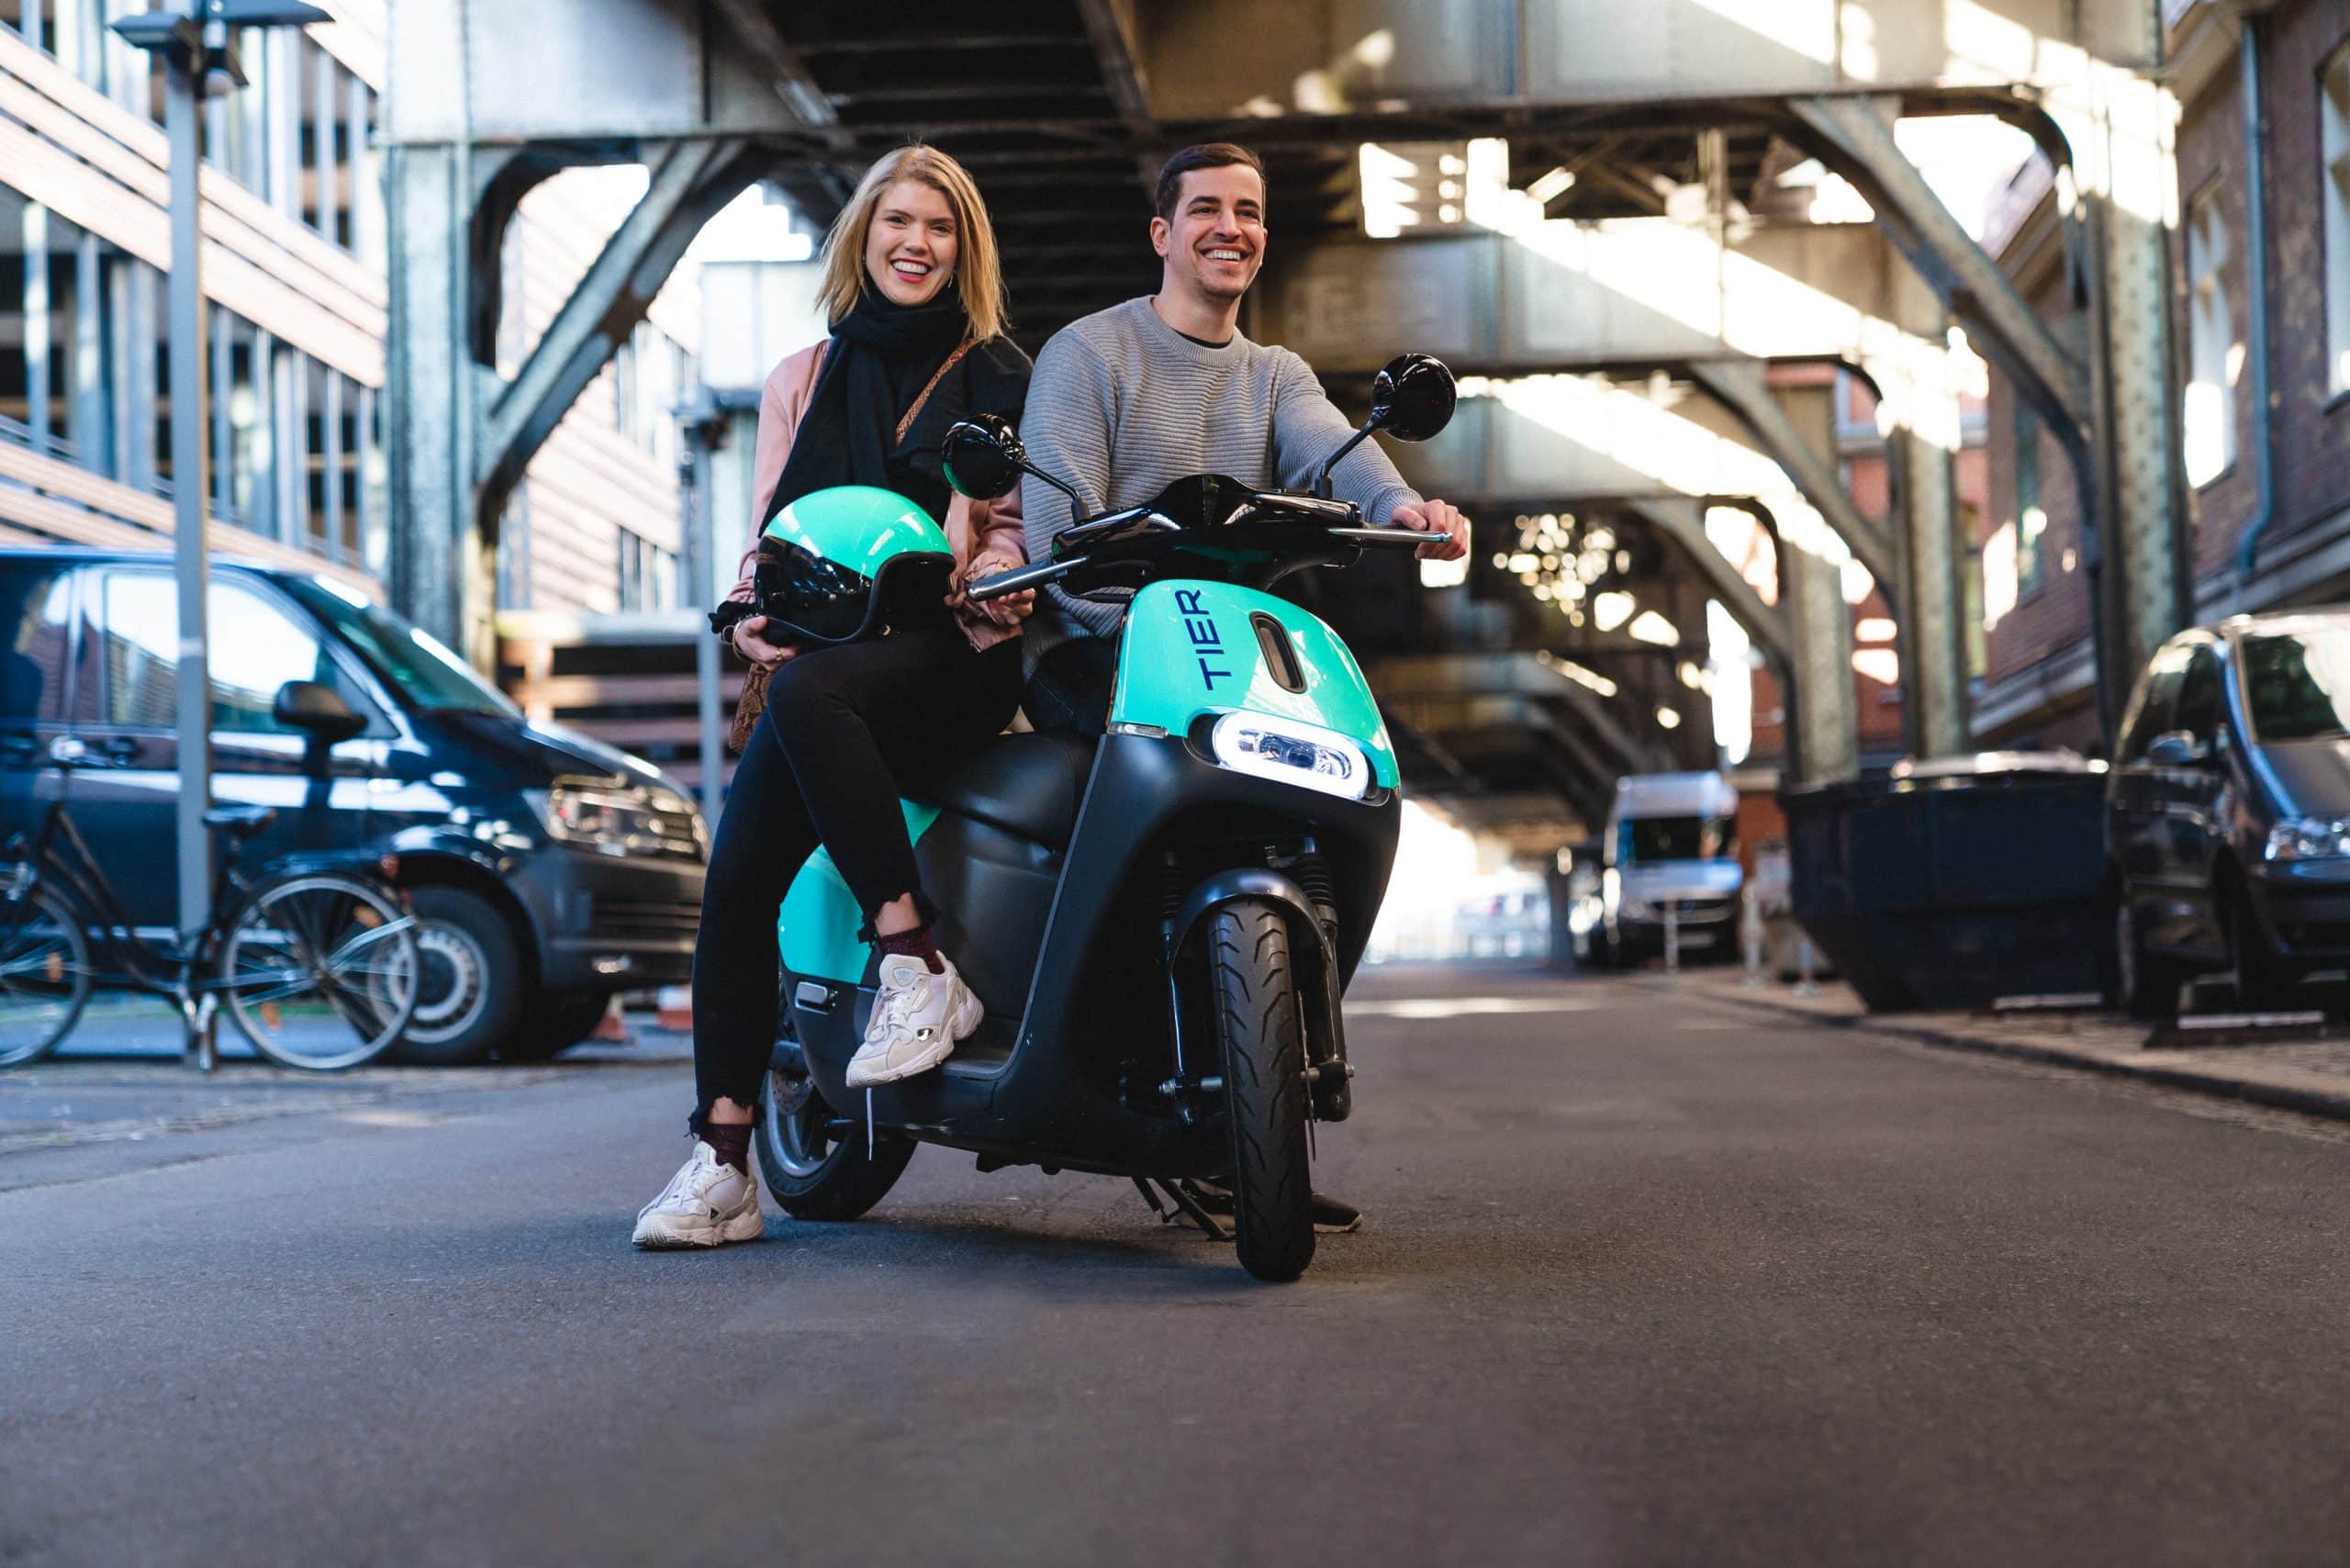 TIER Mobility aquires Coup’s e-mopeds, building out it’s multimodal offering